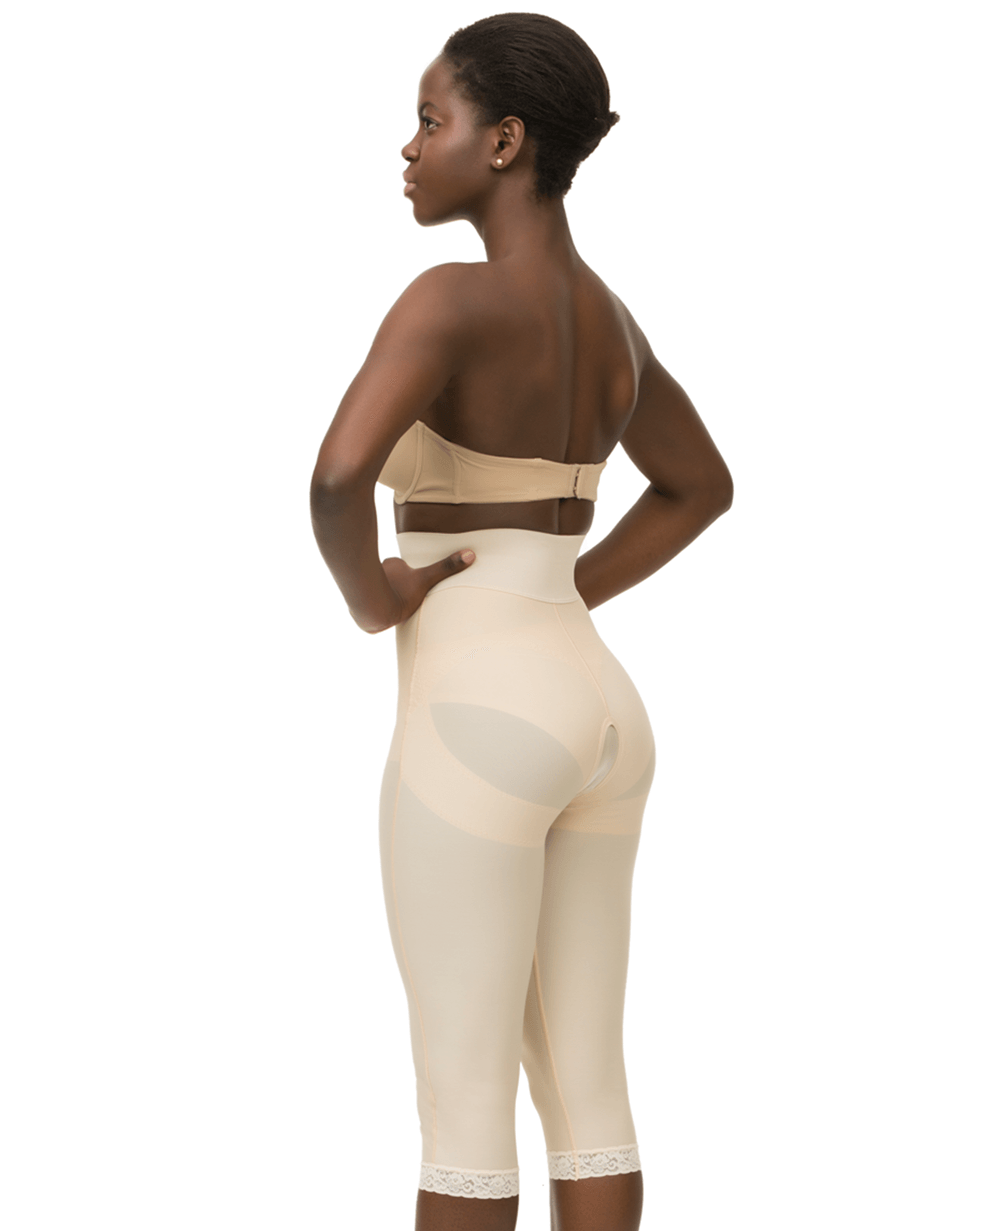 Isavela Body Suit Below the Knee Length W/Suspender Closed Buttocks Enhancing  Compression Girdle W/Zipper (BE07-BK) (XS, Beige) at  Women's  Clothing store